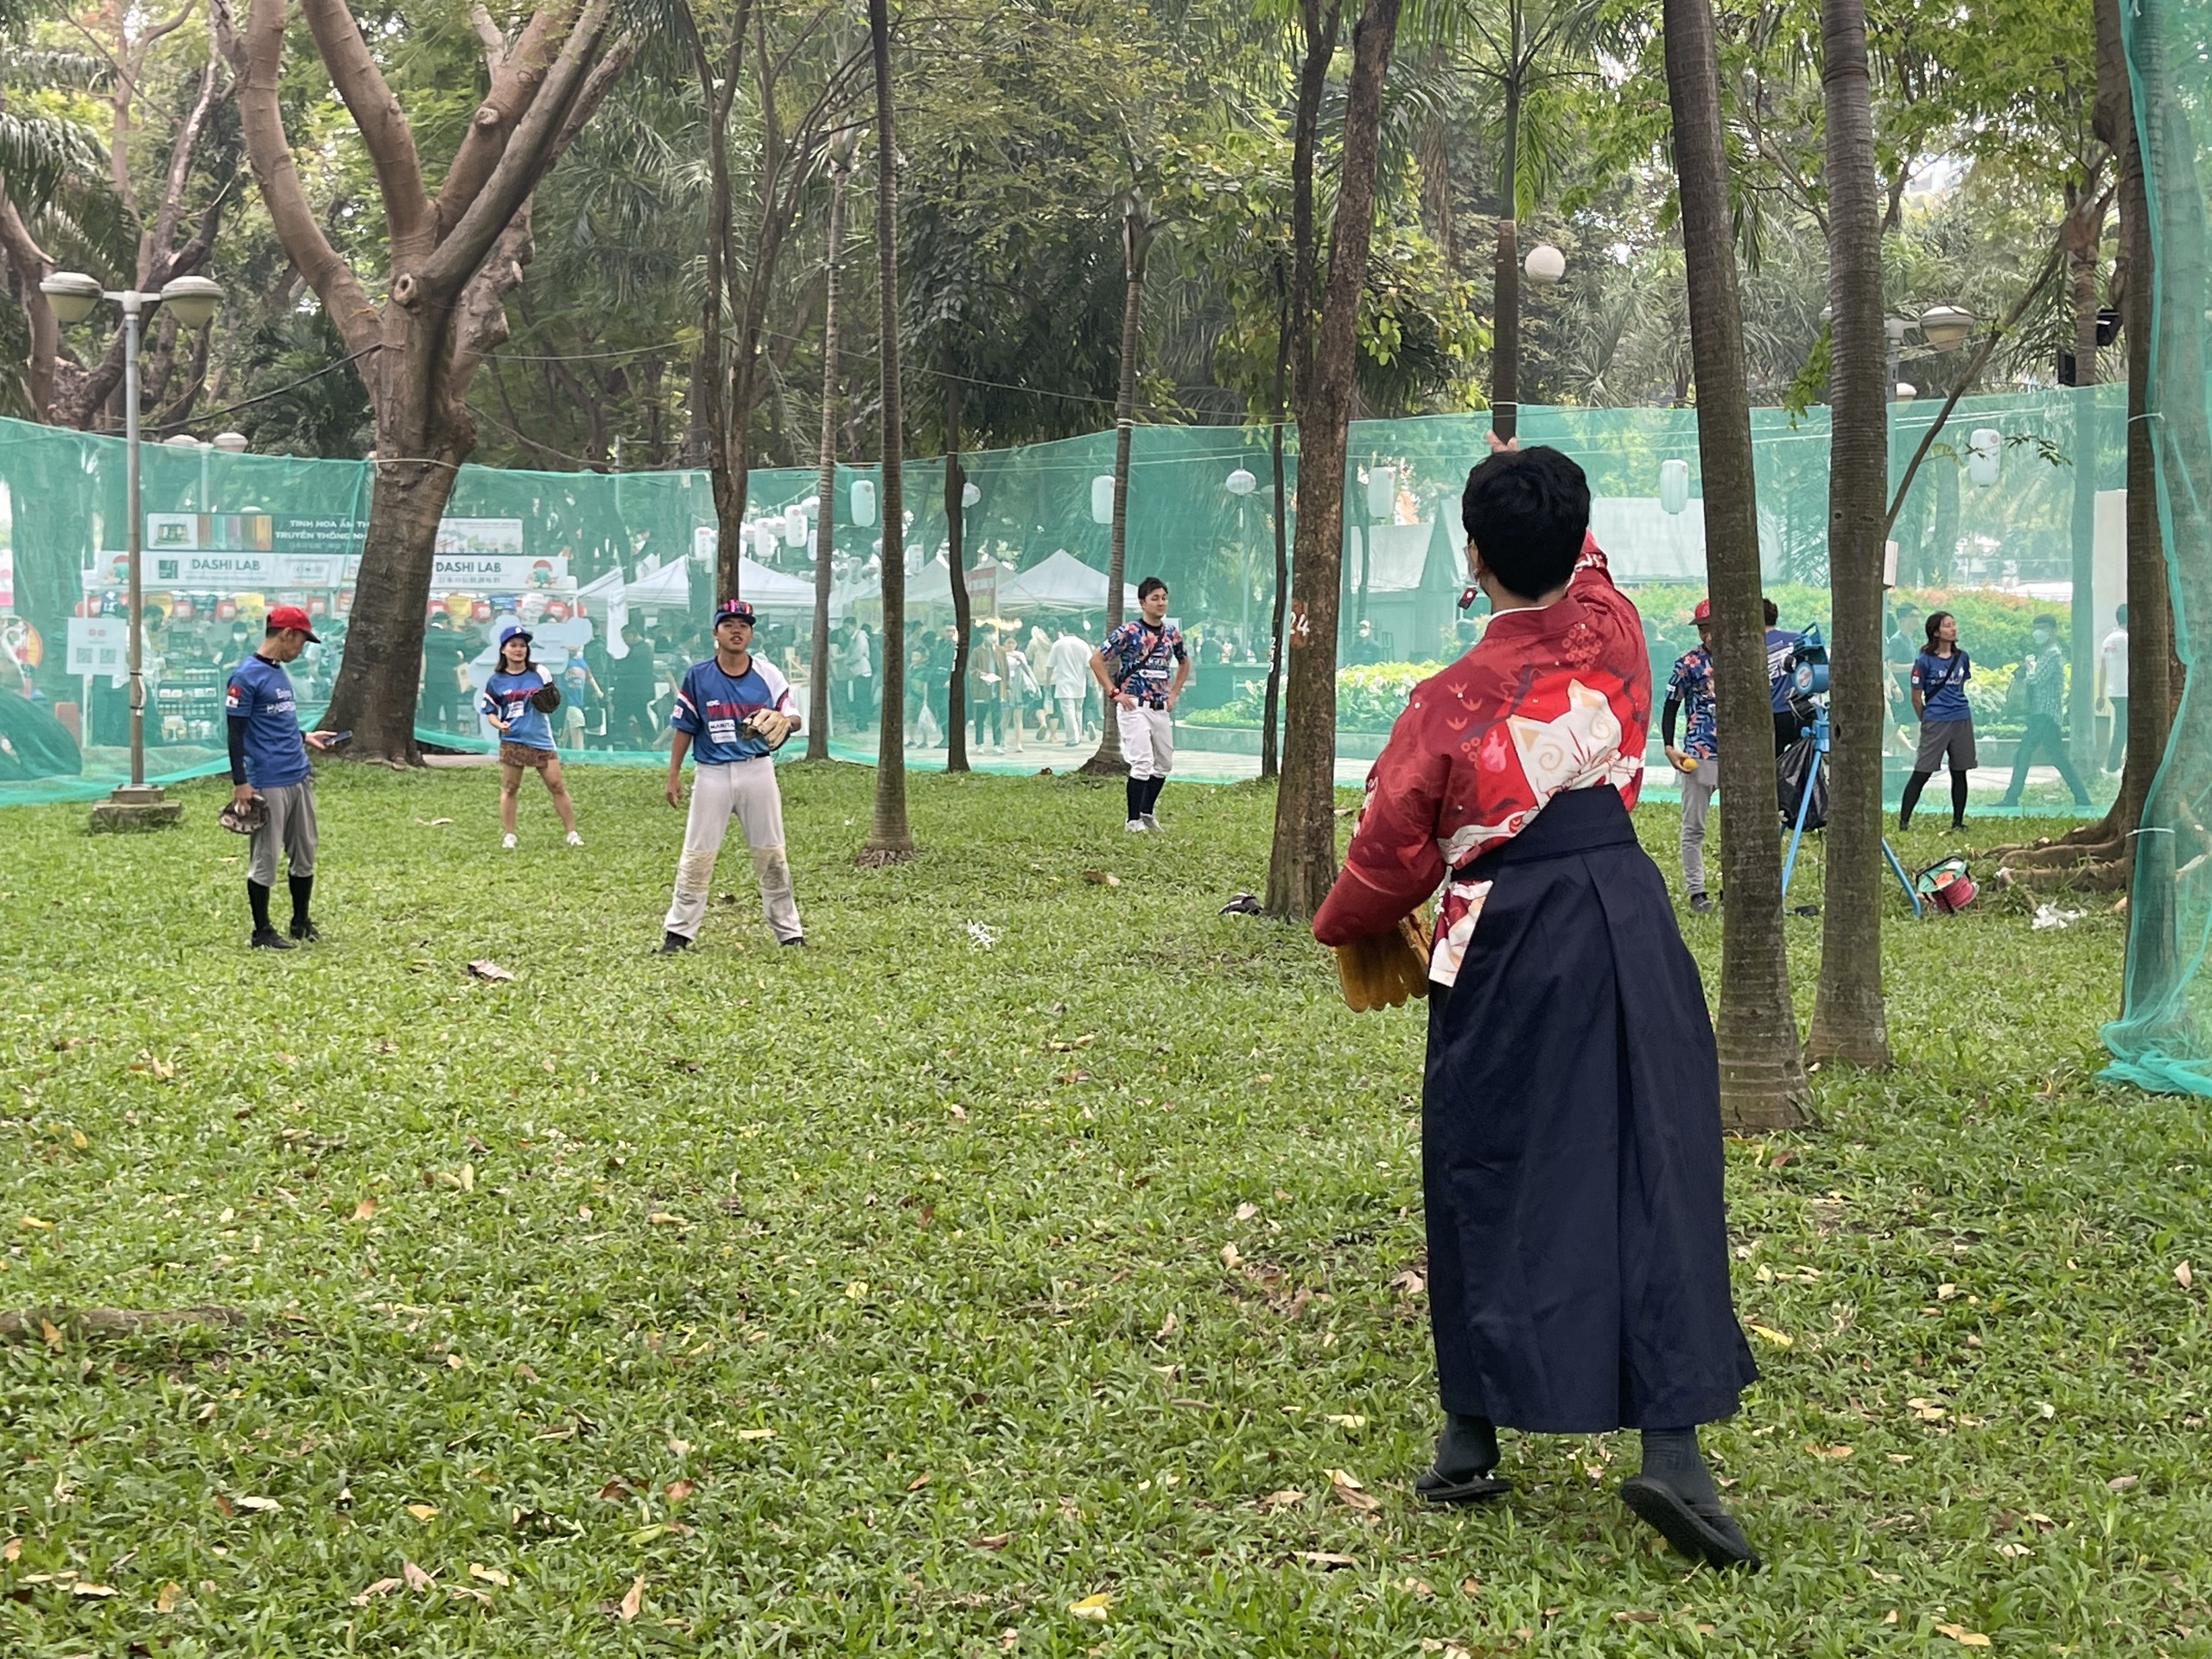 Hua Vy Ha tries playing baseball at the eighth Japan Vietnam Festival in Ho Chi Minh City, February 25, 2023. Photo: Dong Nguyen / Tuoi Tre News